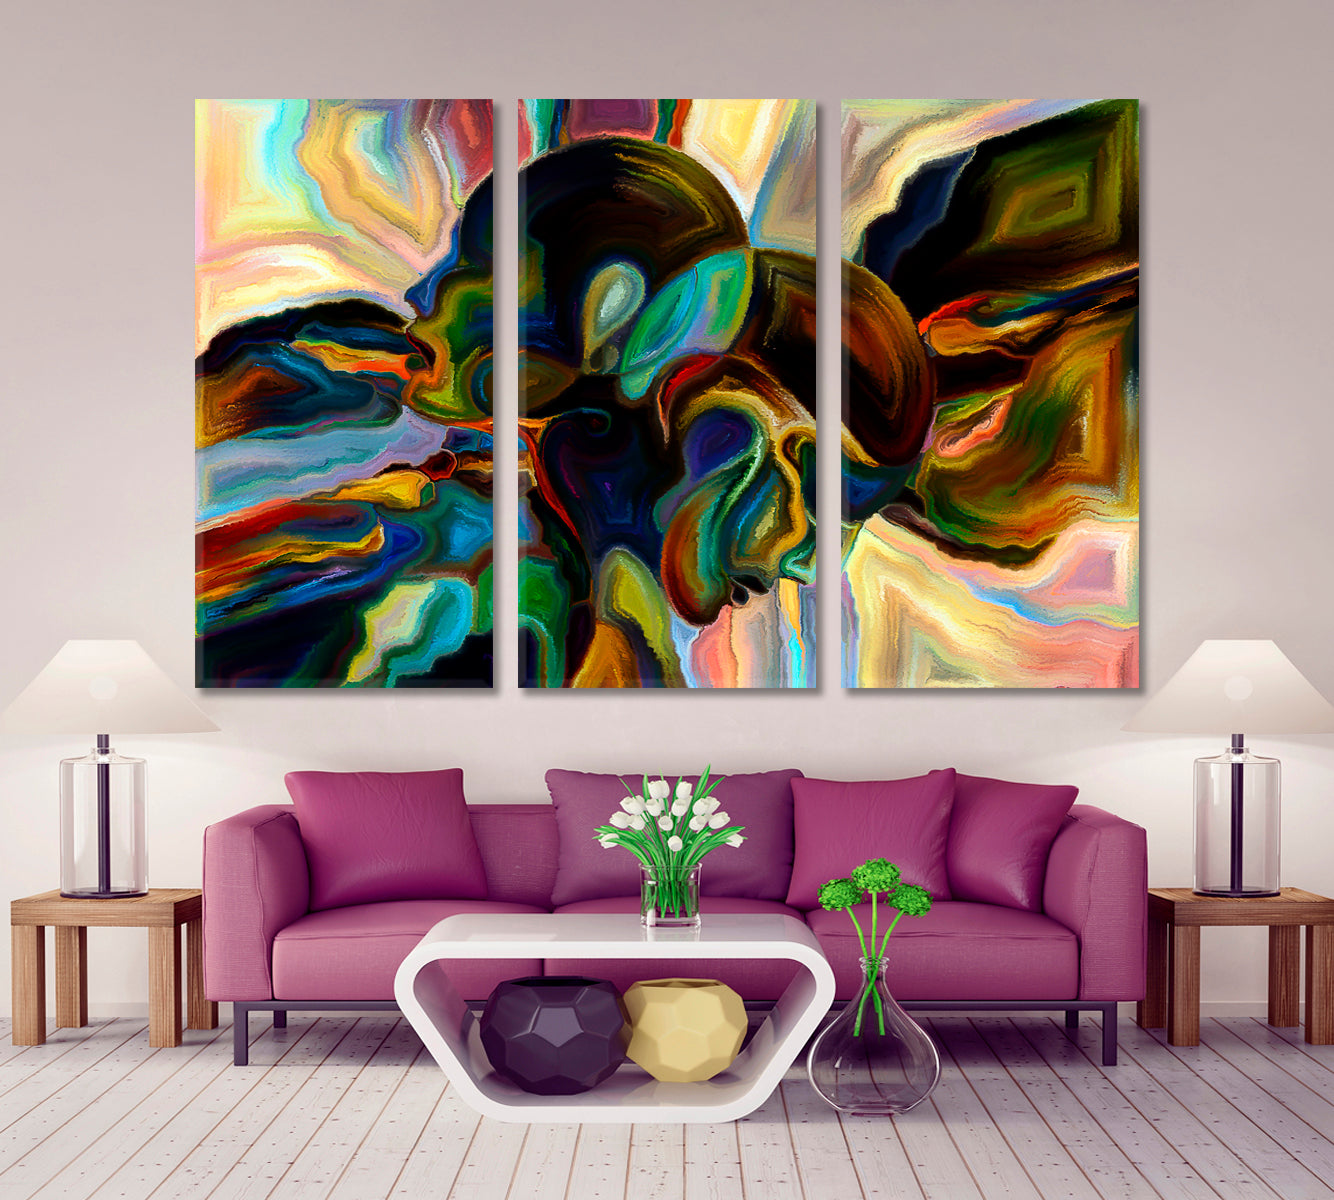 Life In Colors Contemporary Art Artesty 3 panels 36" x 24" 